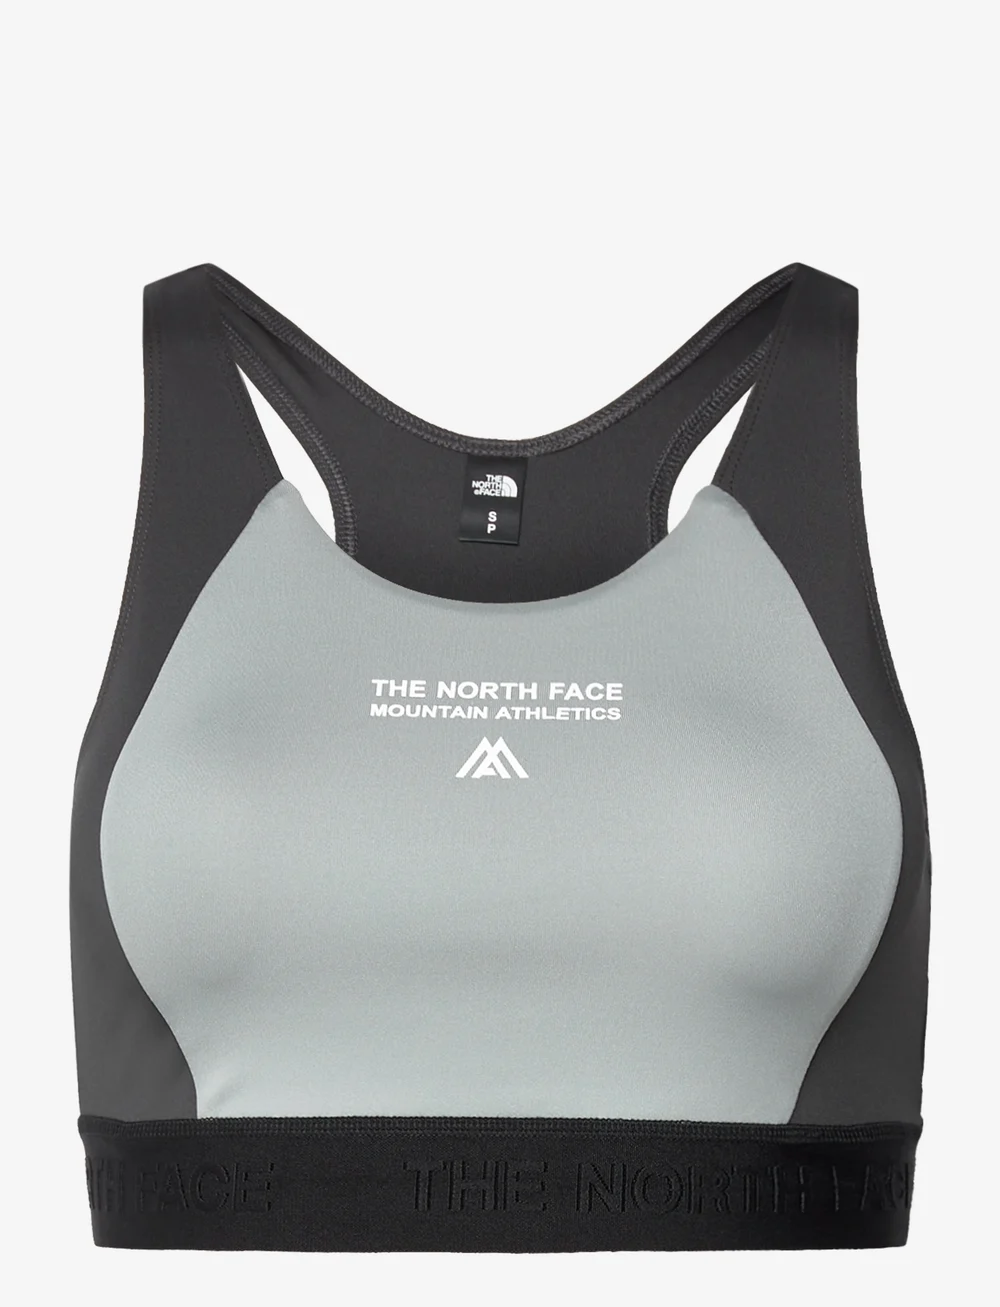 The North Face W Ma Bra – bras – shop at Booztlet